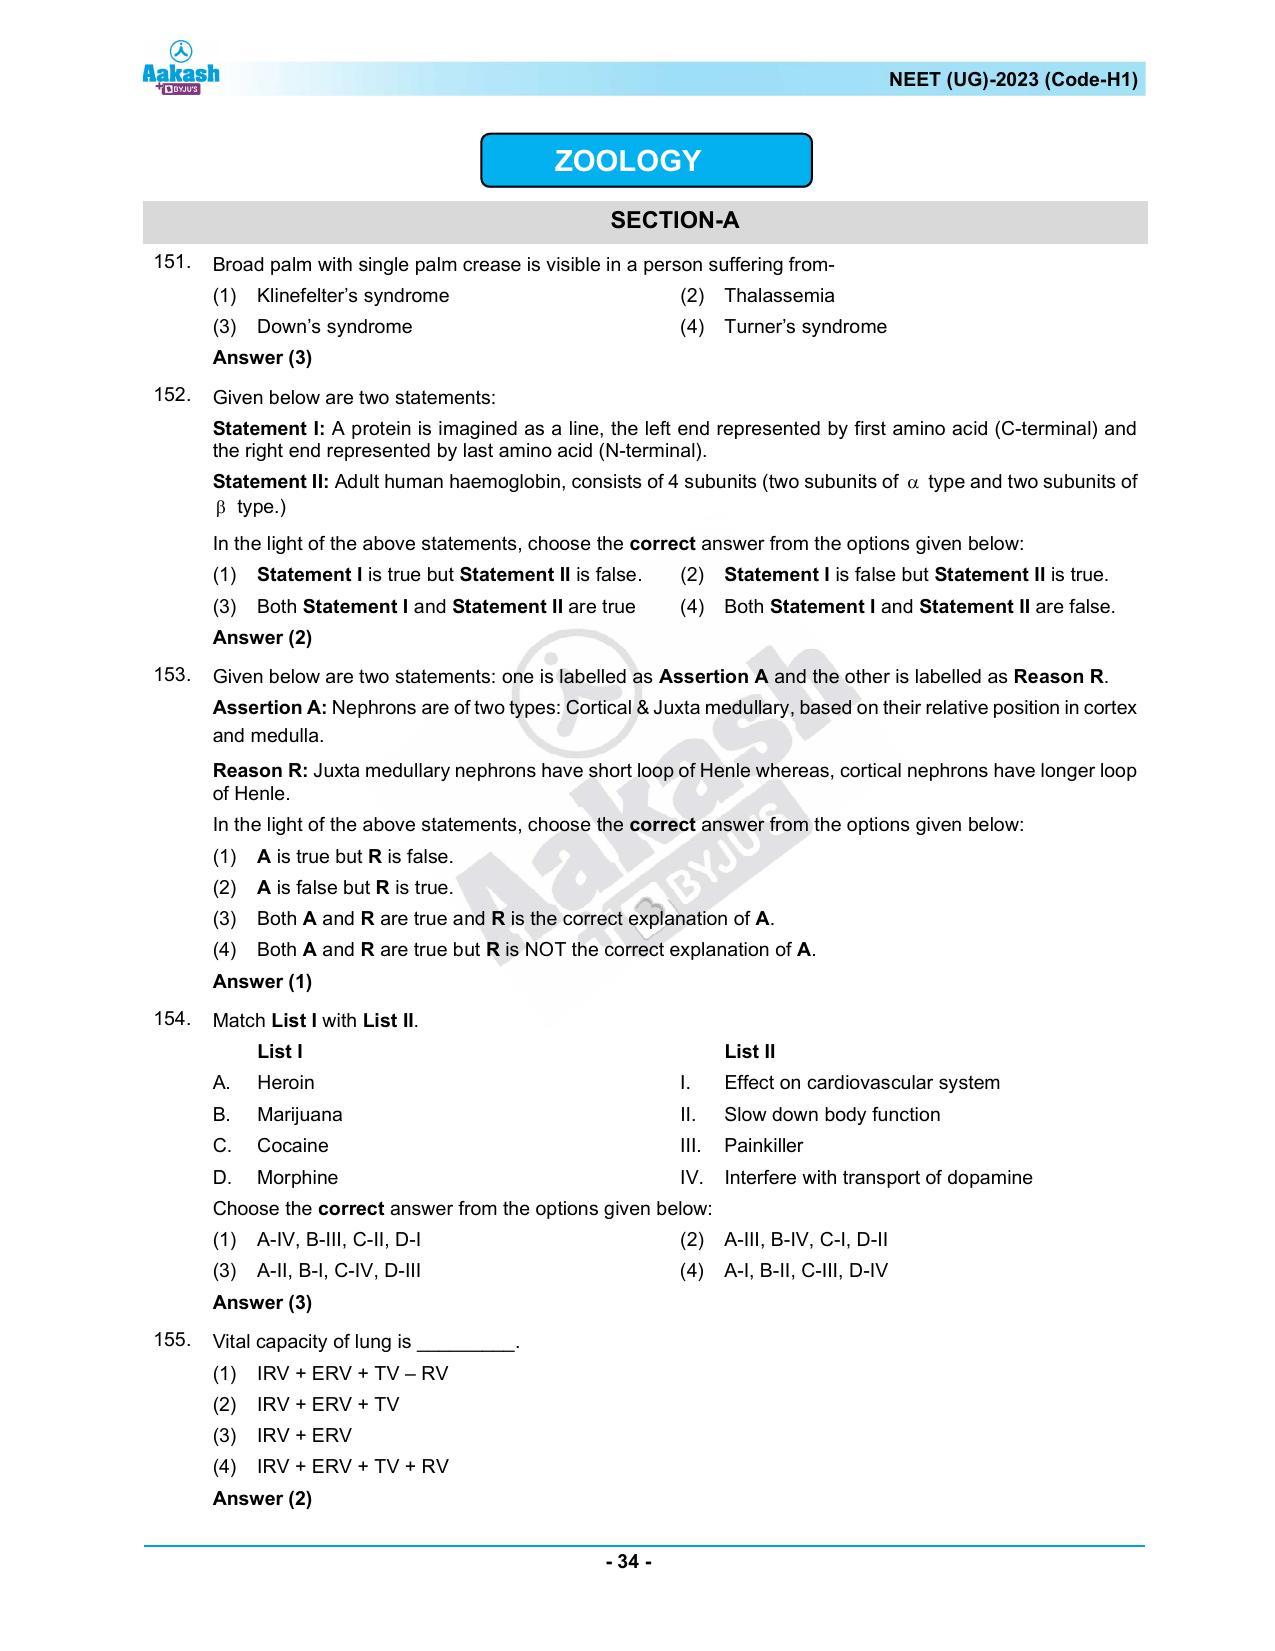 NEET 2023 Question Paper H1 - Page 34